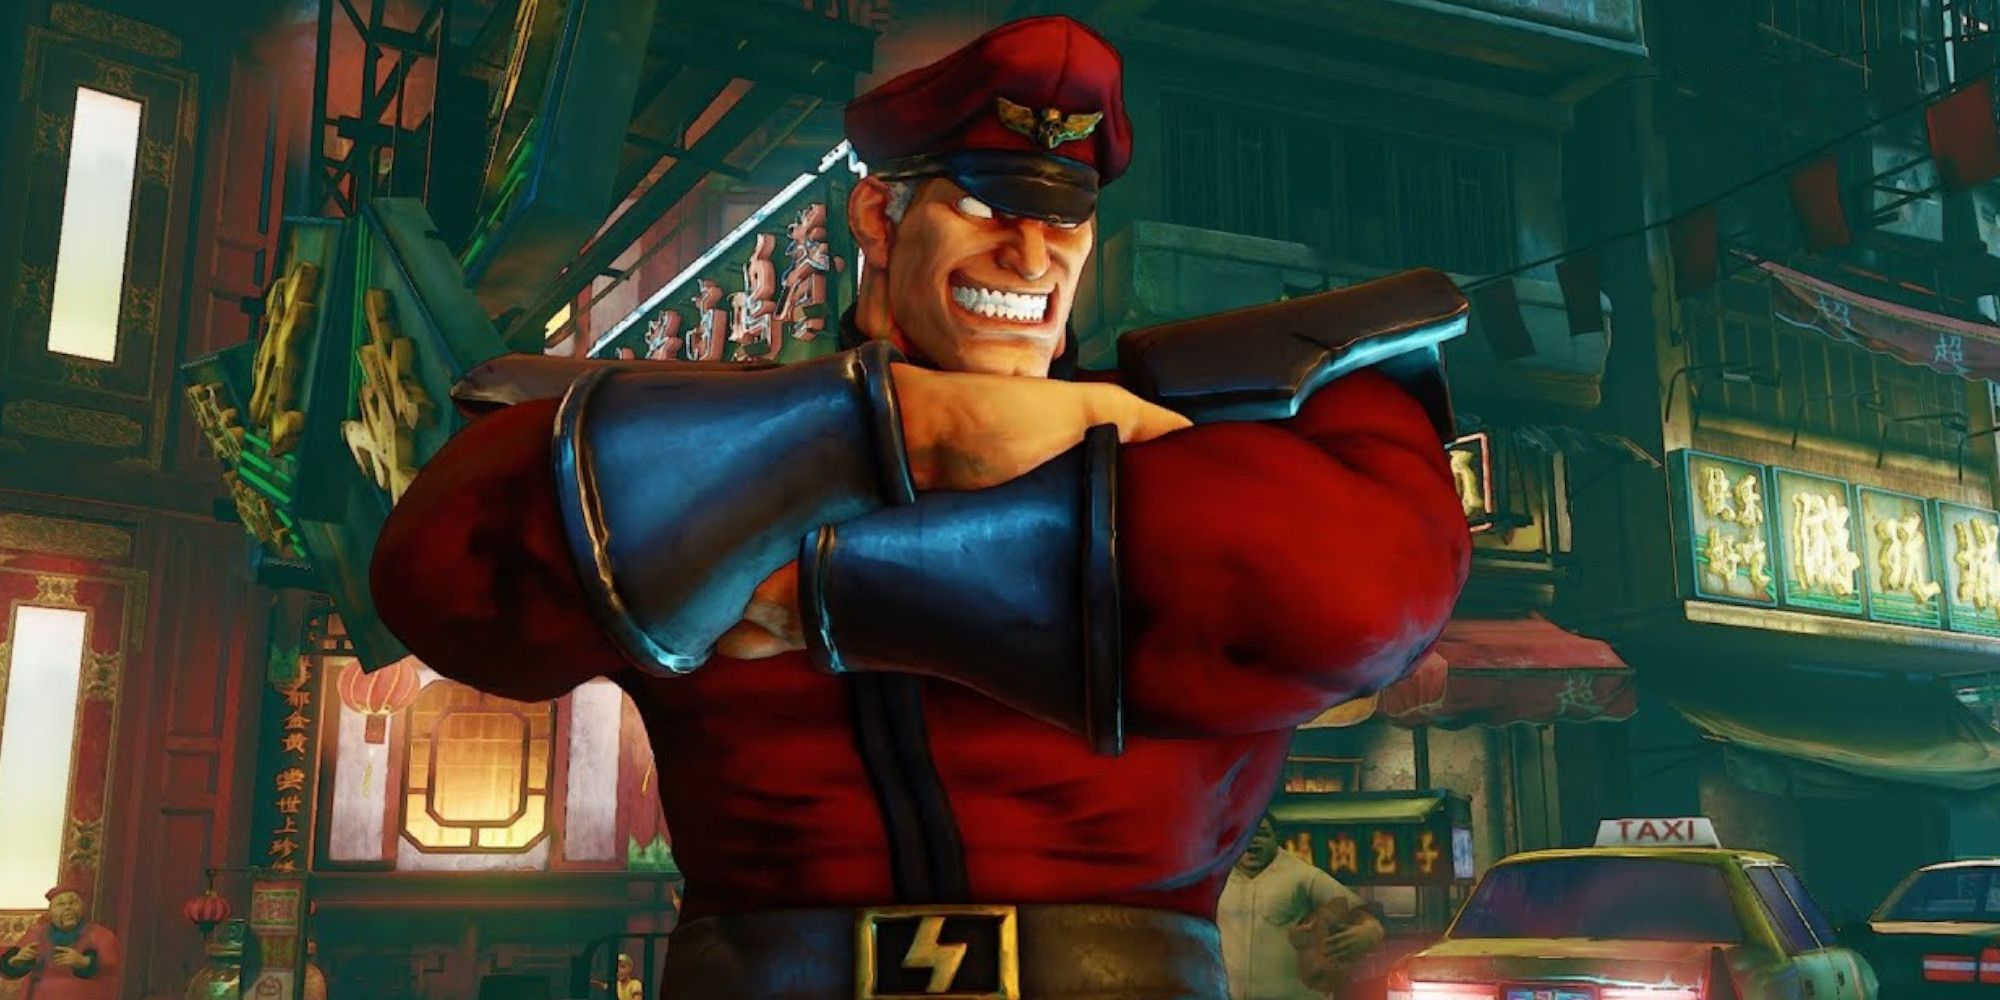 M. Bison grinning menacingly with crossed arms